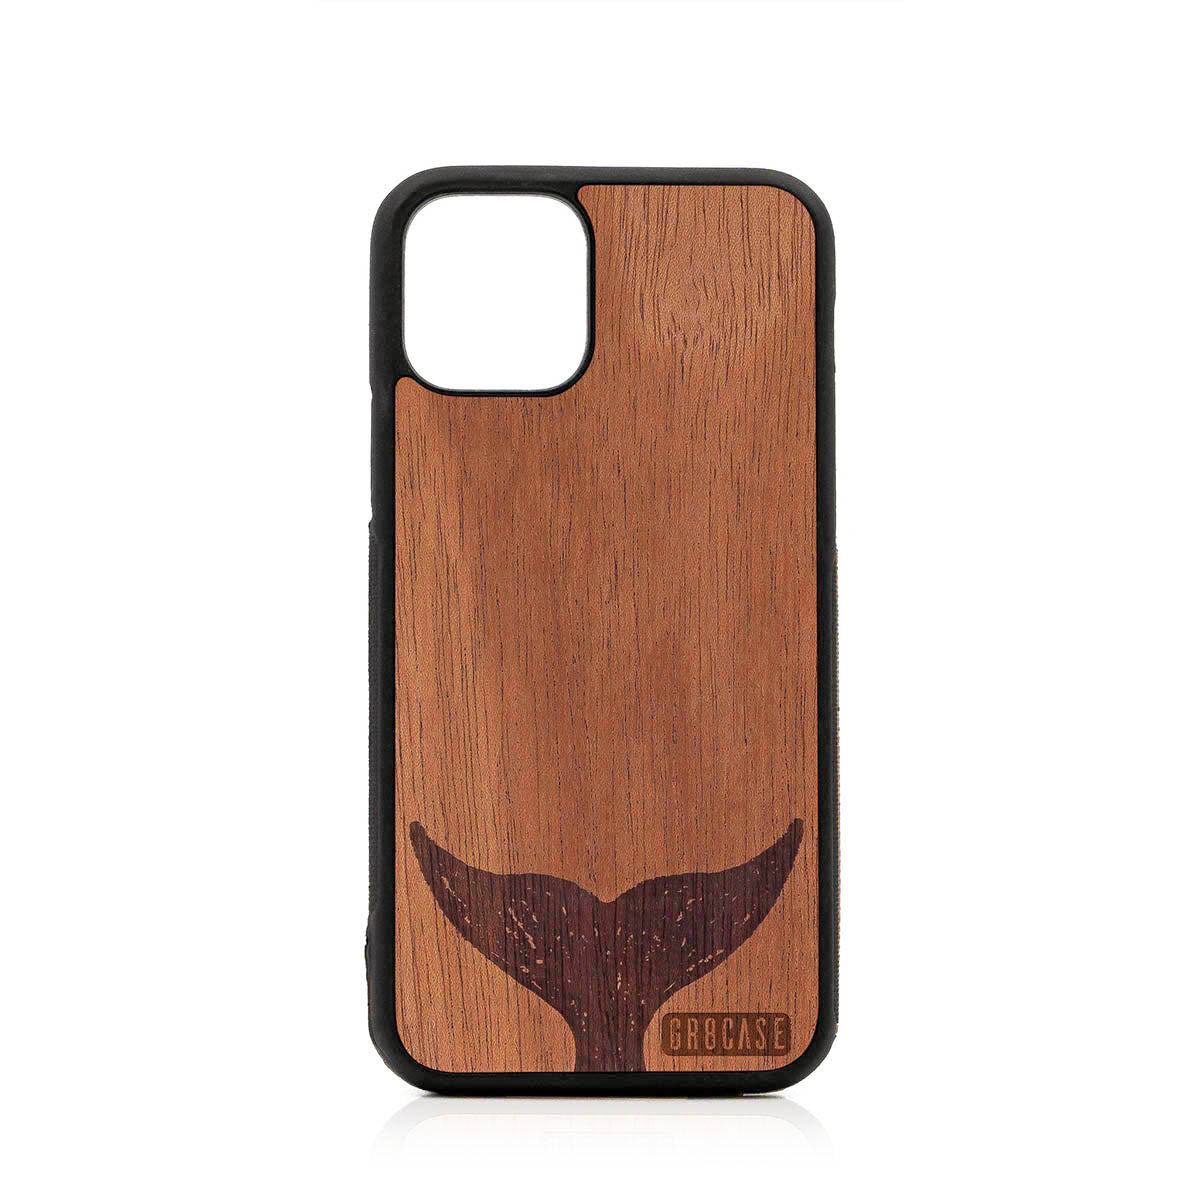 Whale Tail Design Wood Case For iPhone 11 Pro